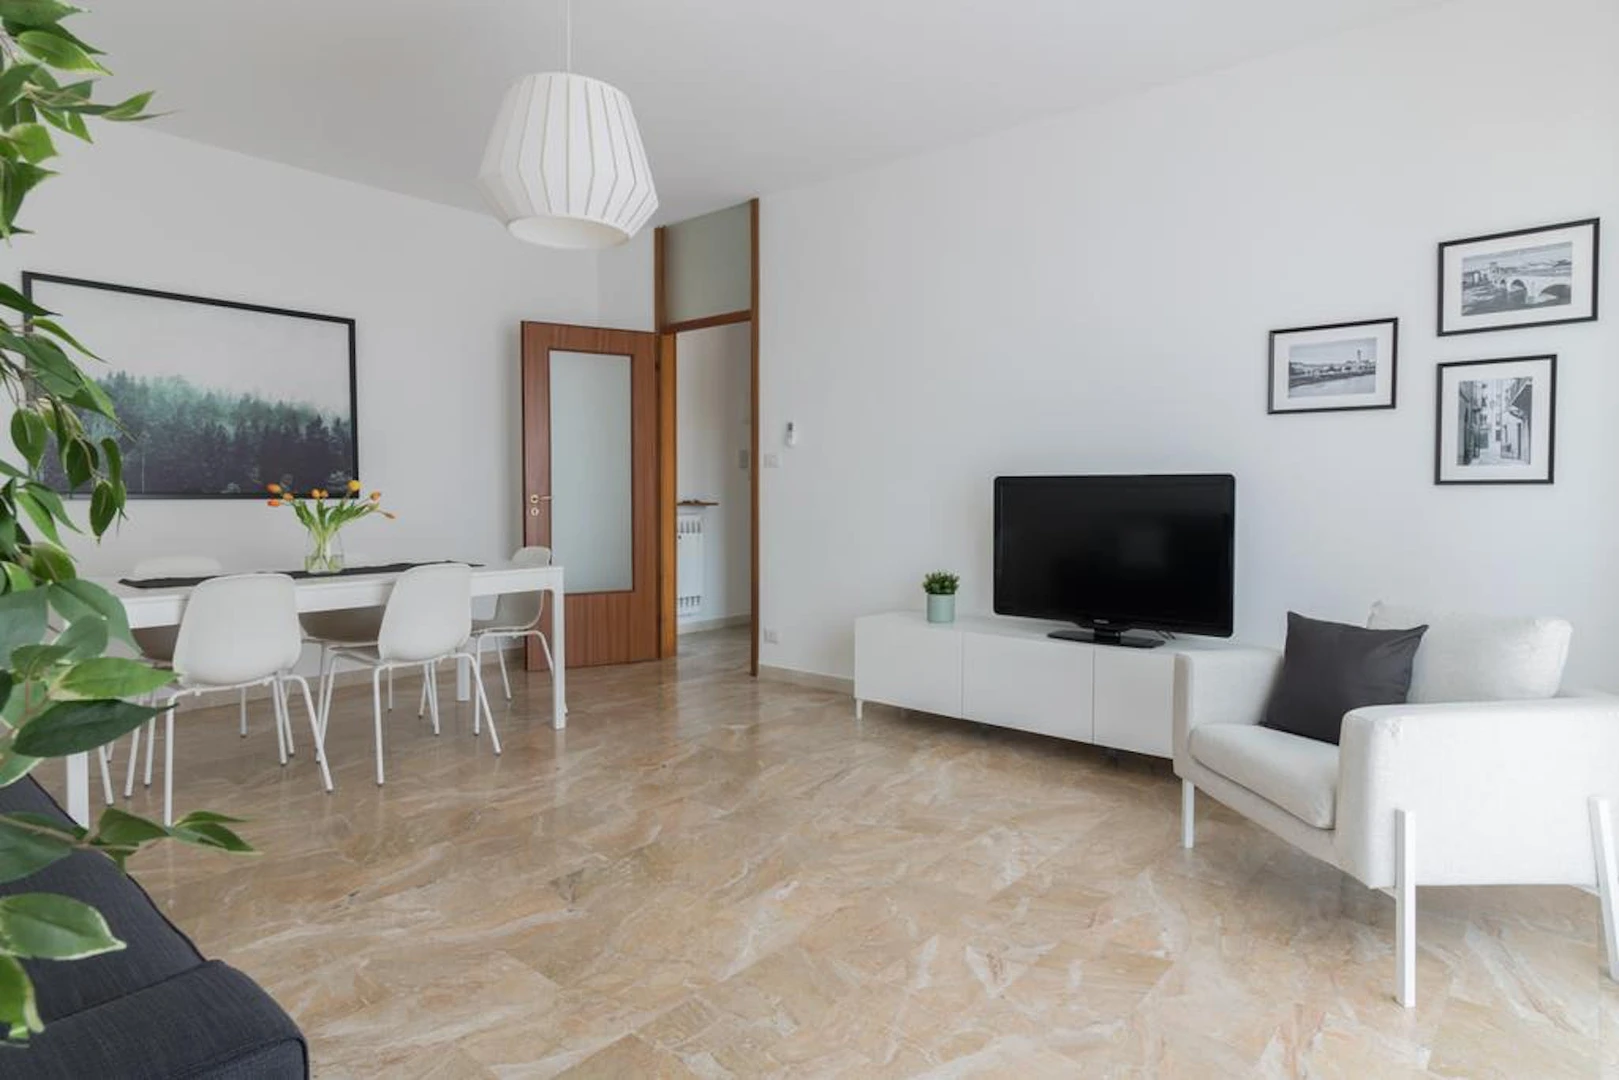 Accommodation in the centre of Verona